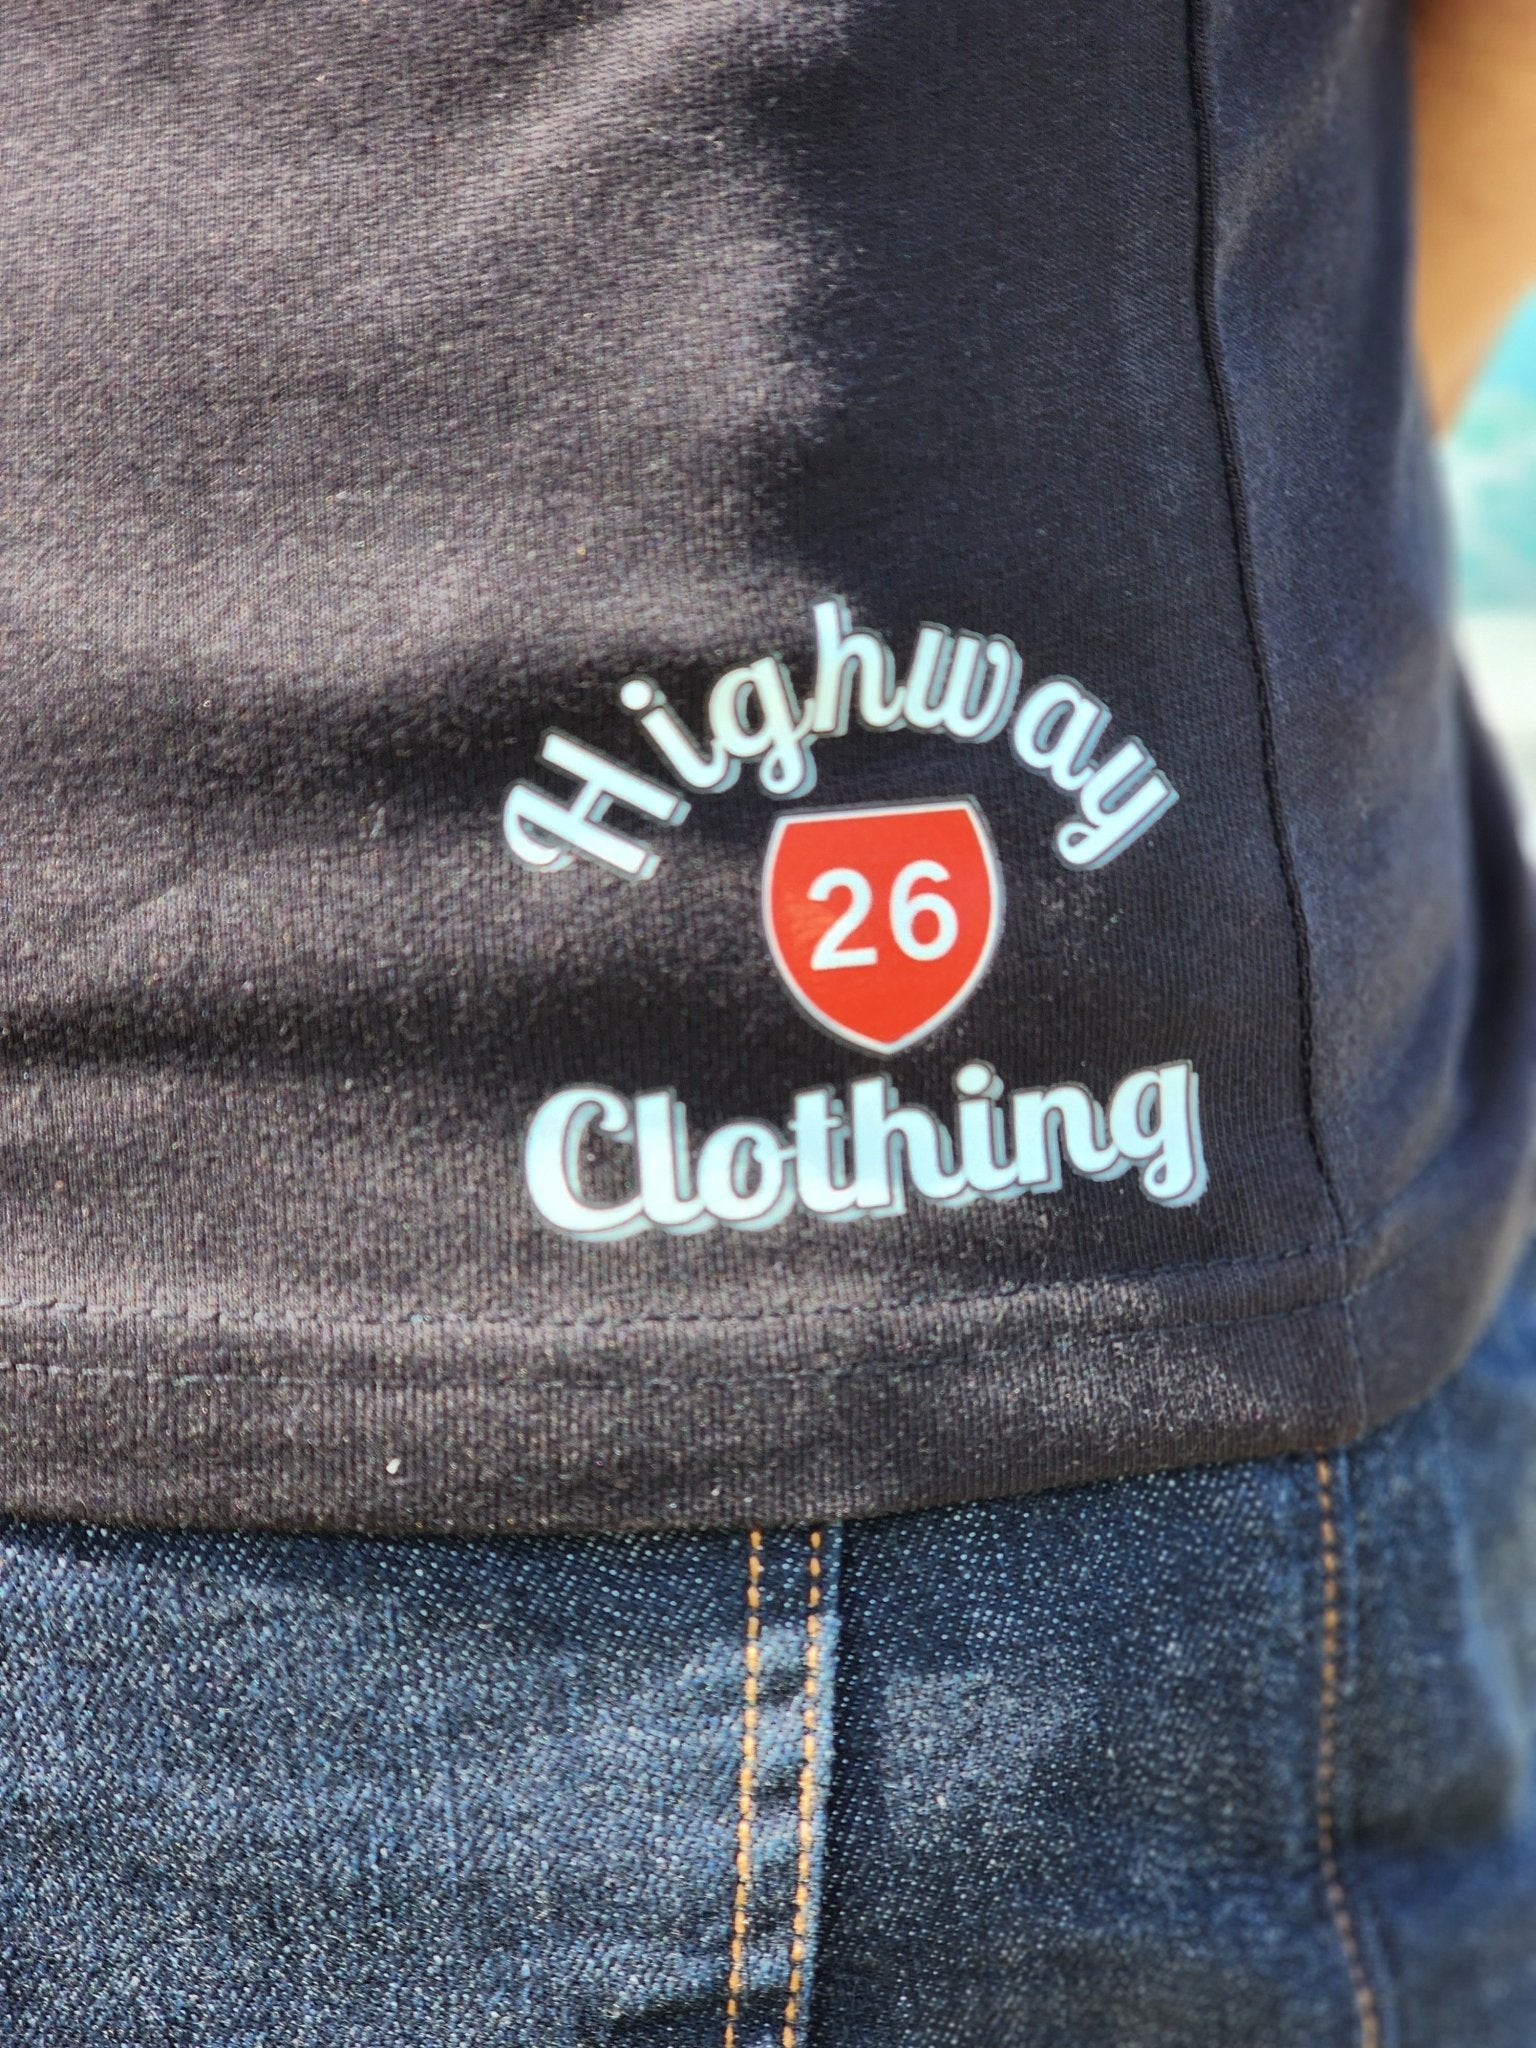 Old School T-shirt - Highway 26 Clothing